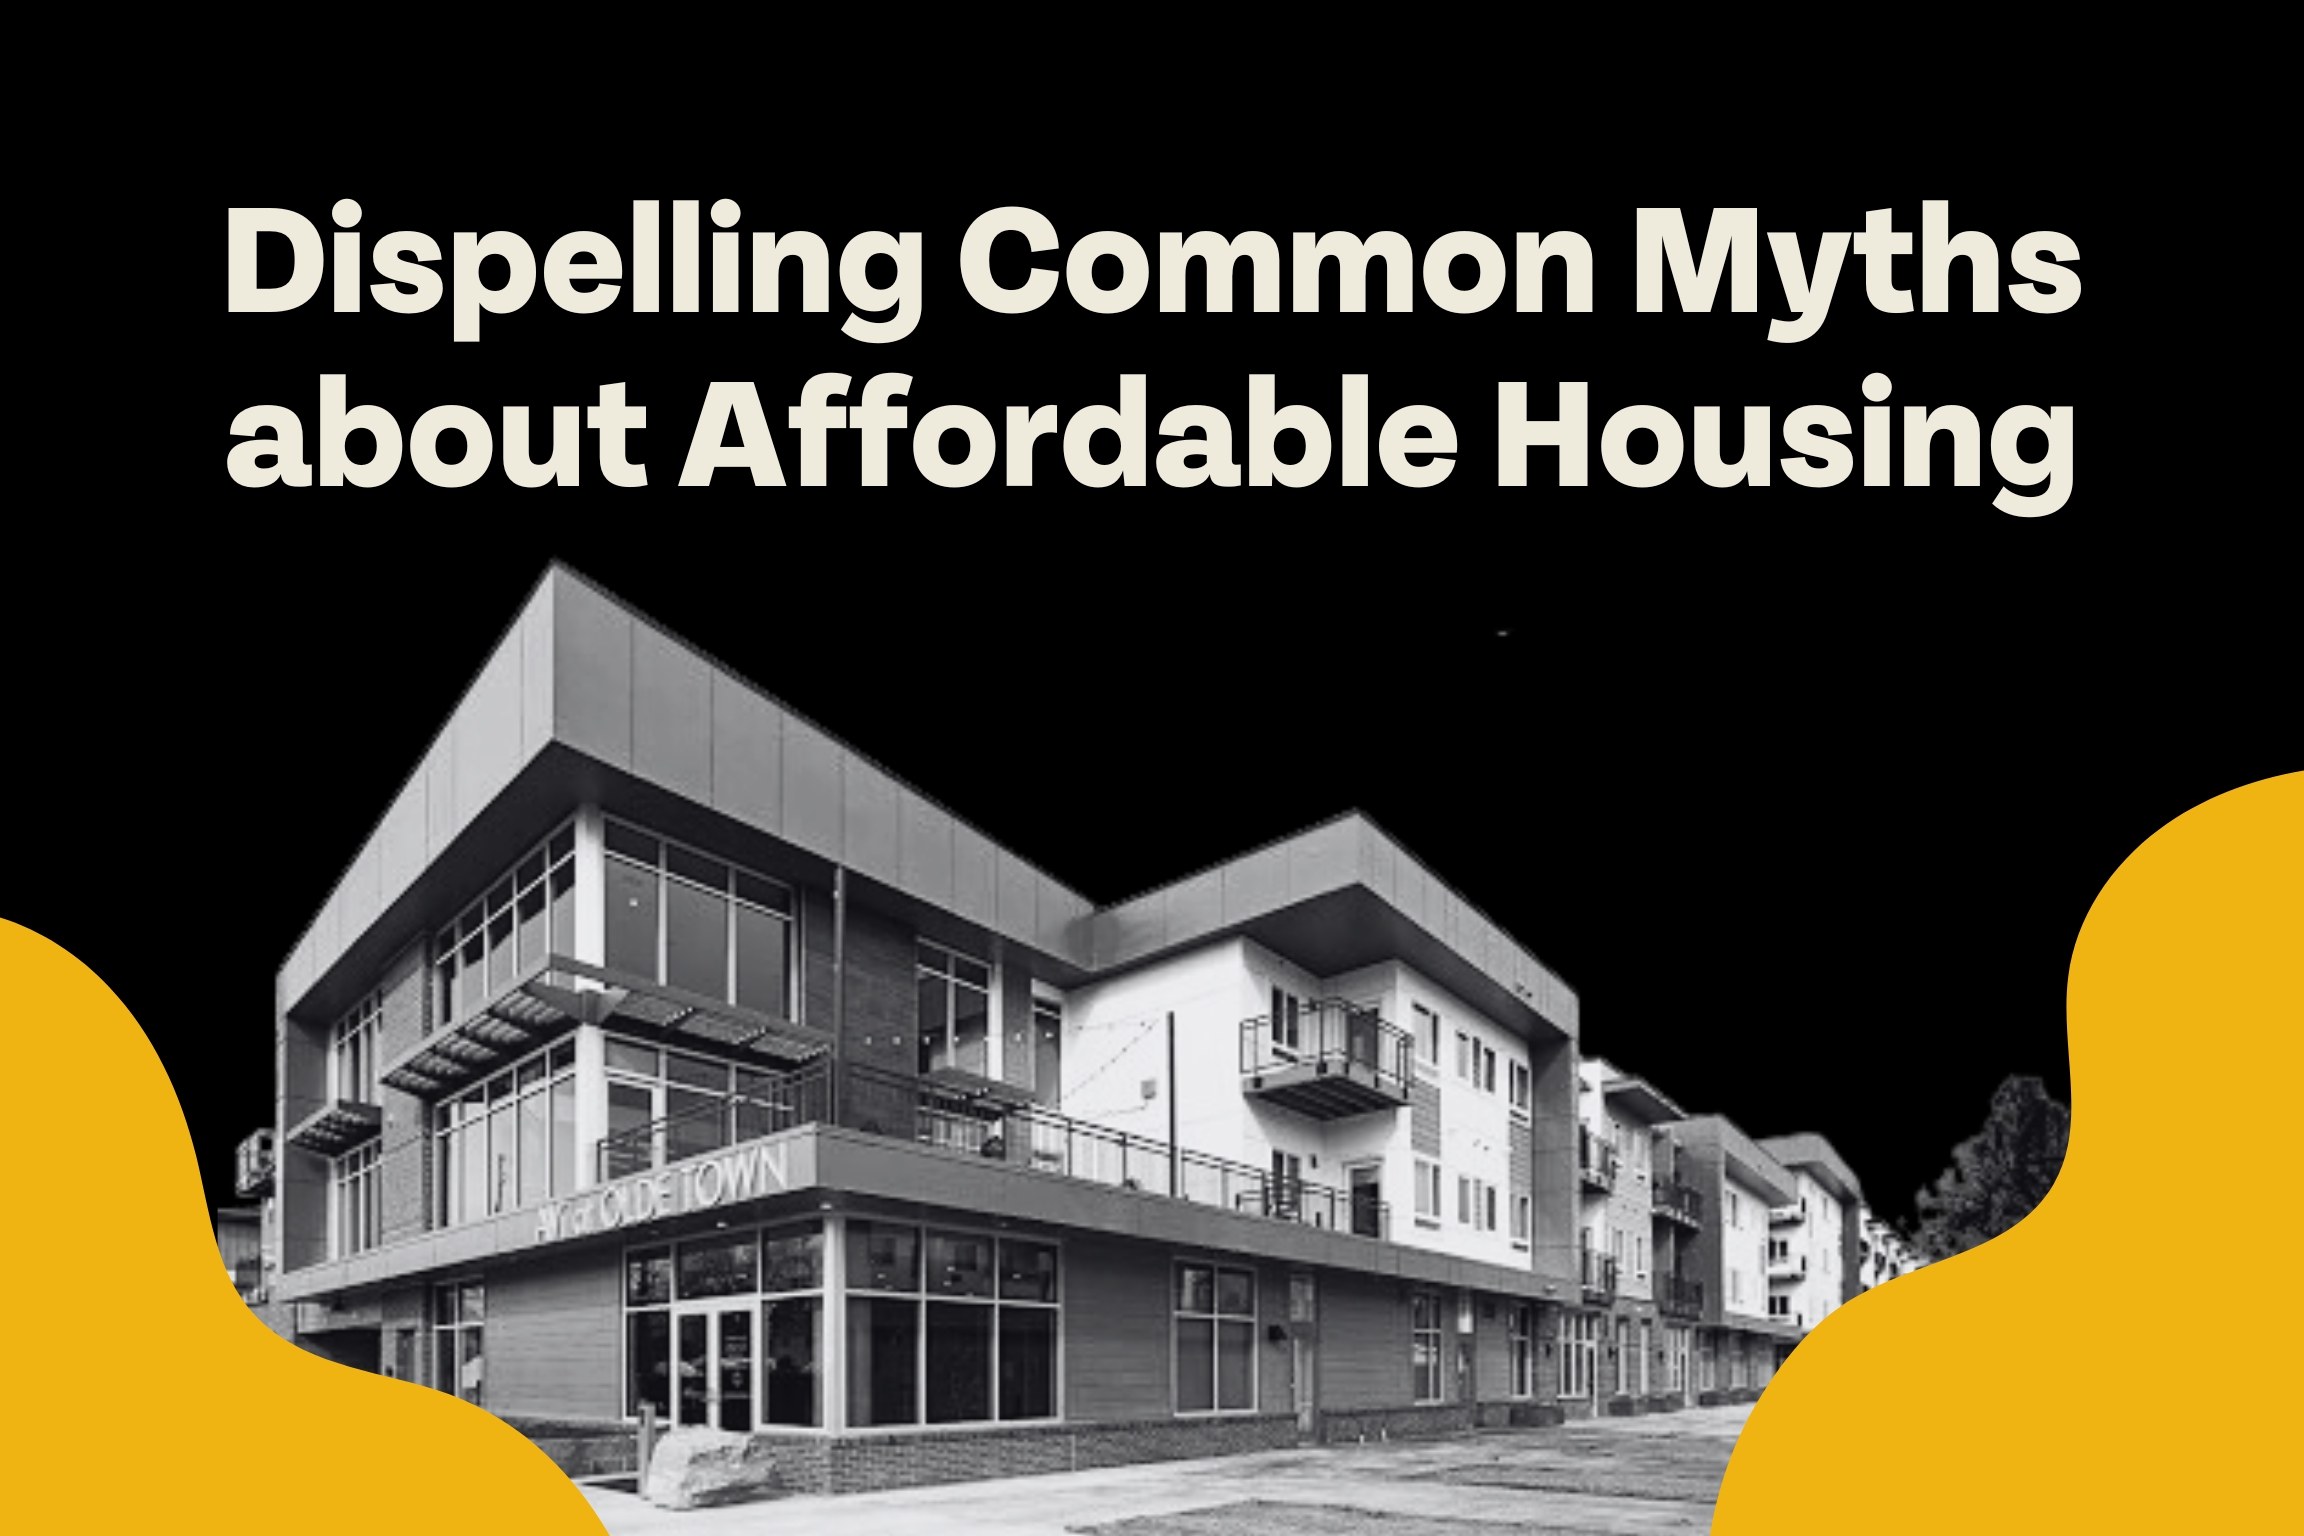 Exploring the realities of affordable housing and dispelling common myths.